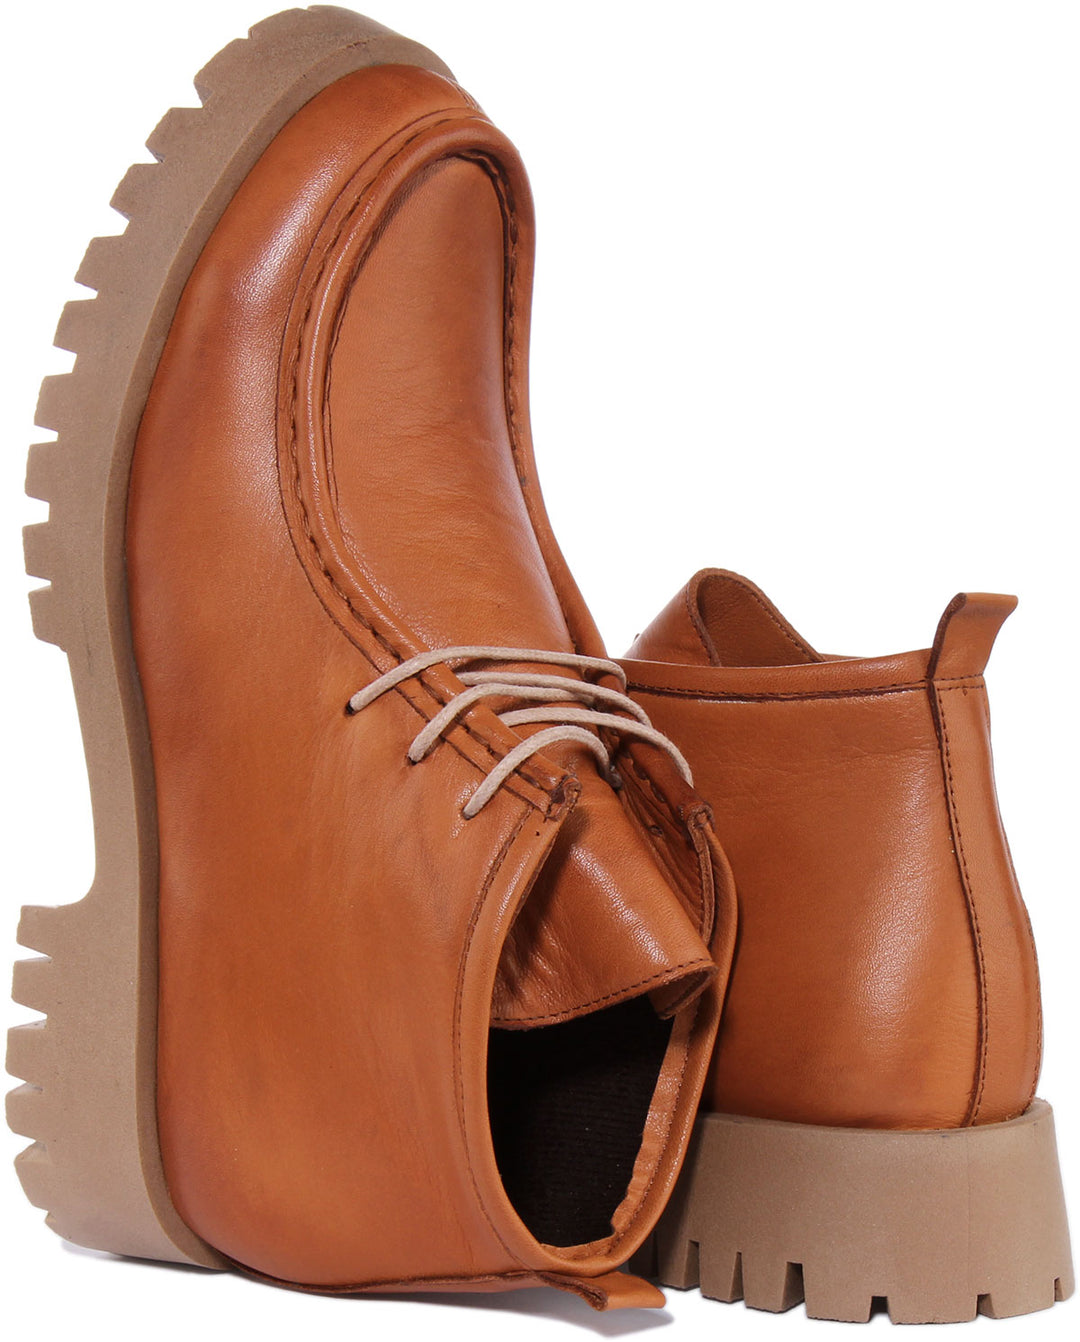 Justinreess England Judith In Tan For Women